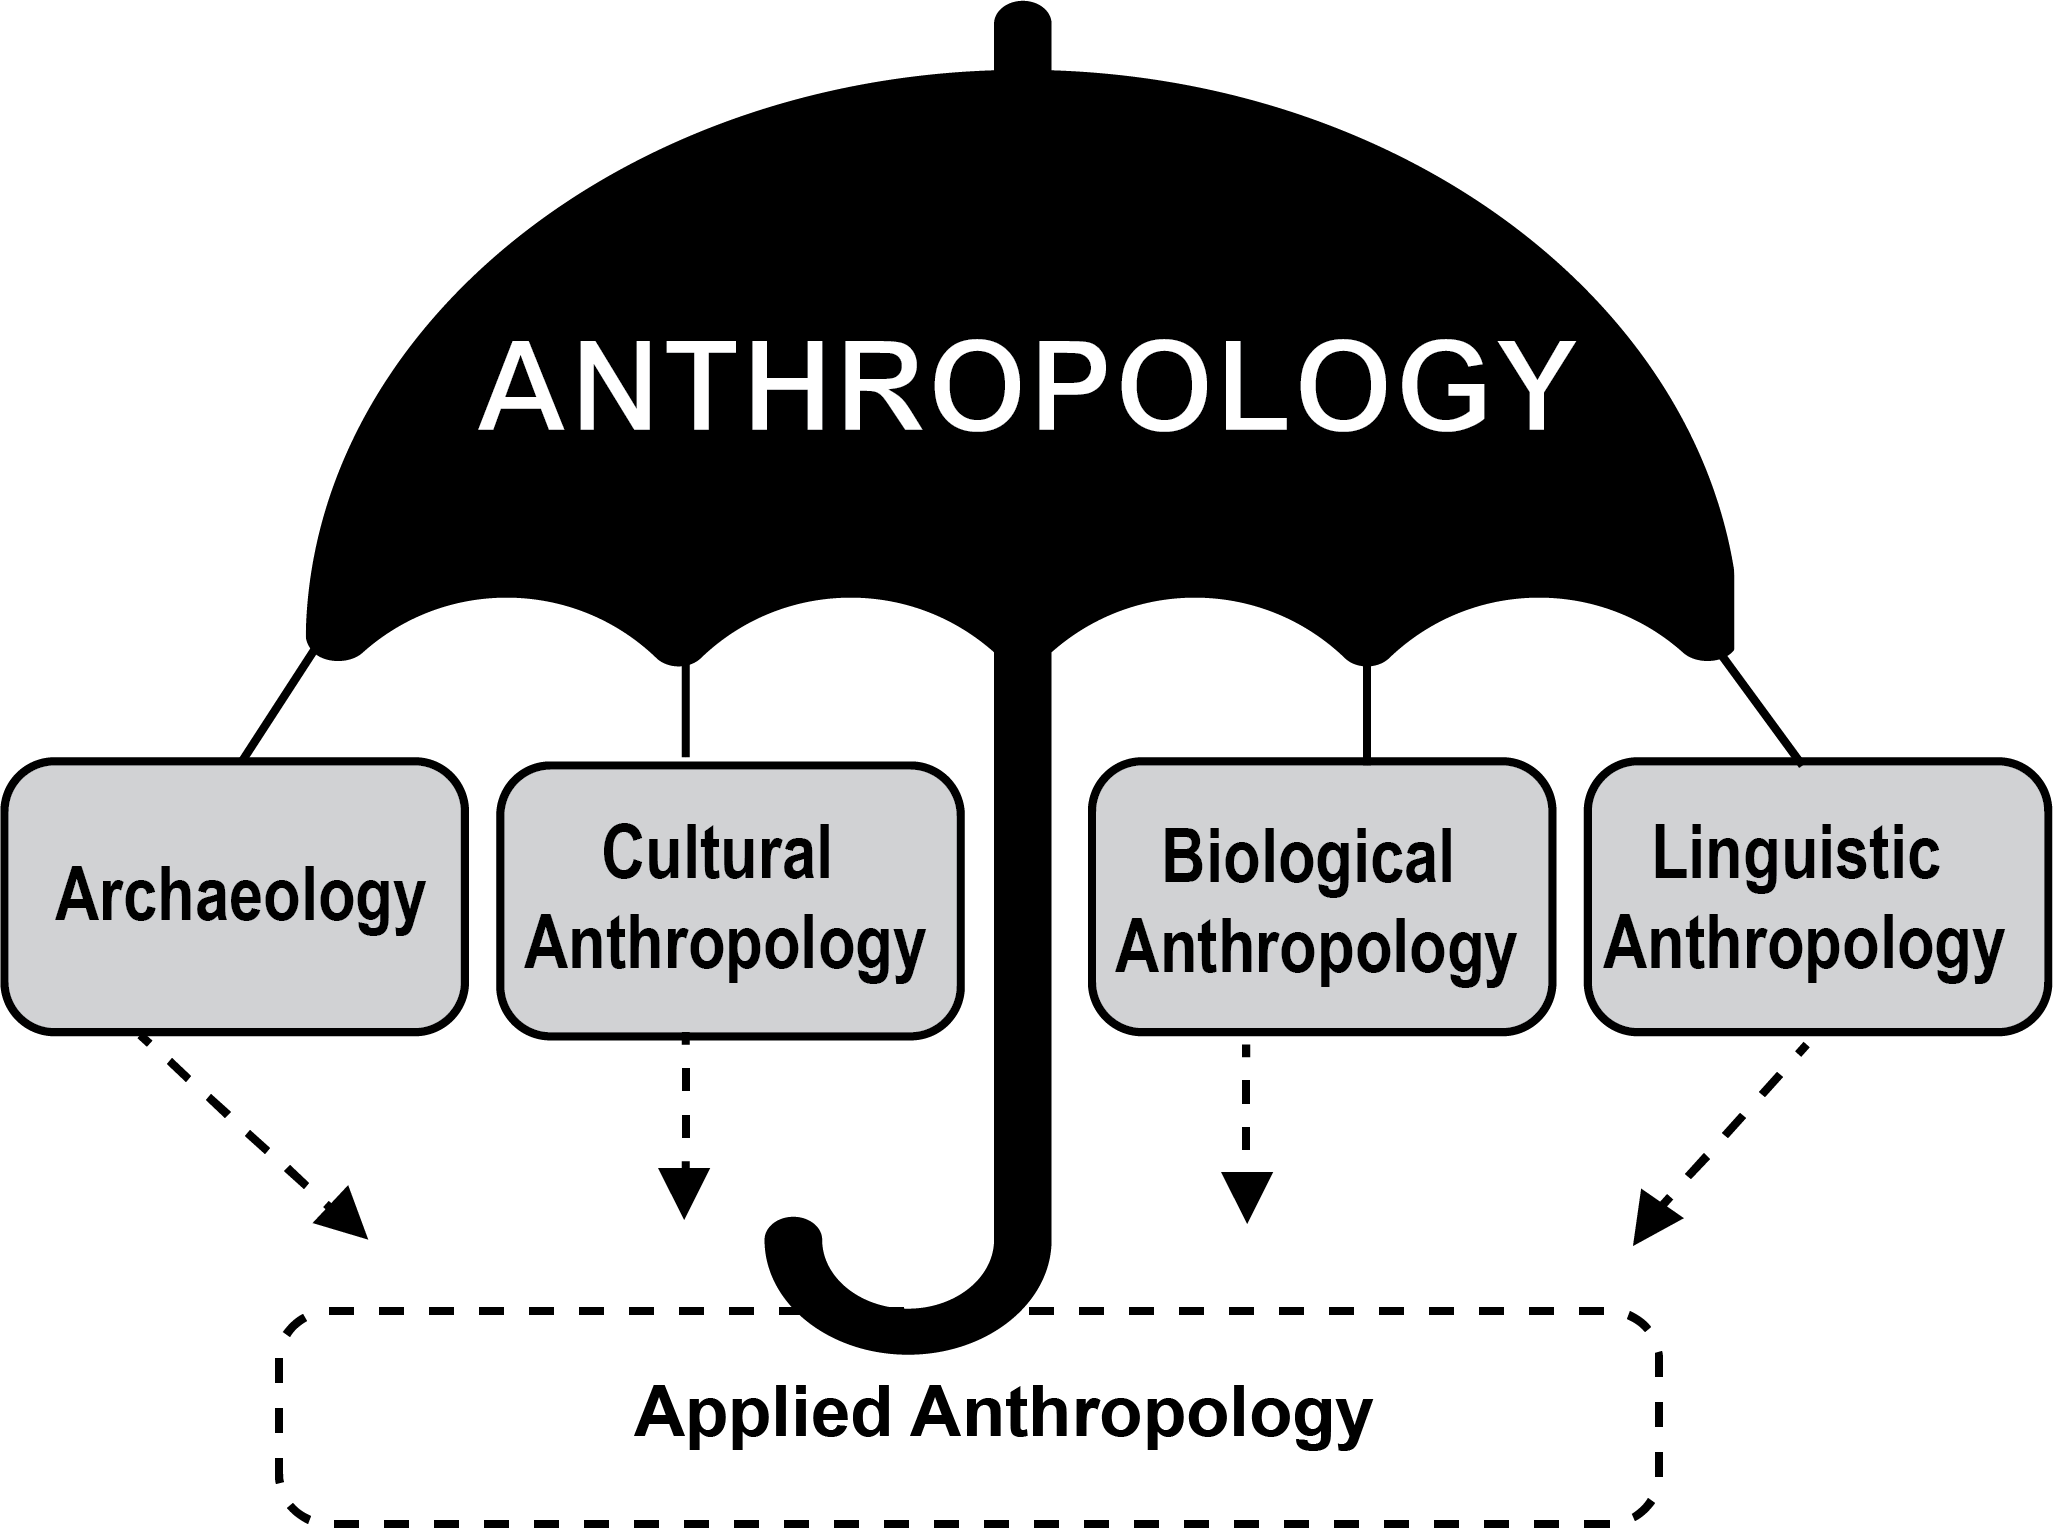 Image of the discipline of anthropology and its four subdisciplines as well as an applied dimension.